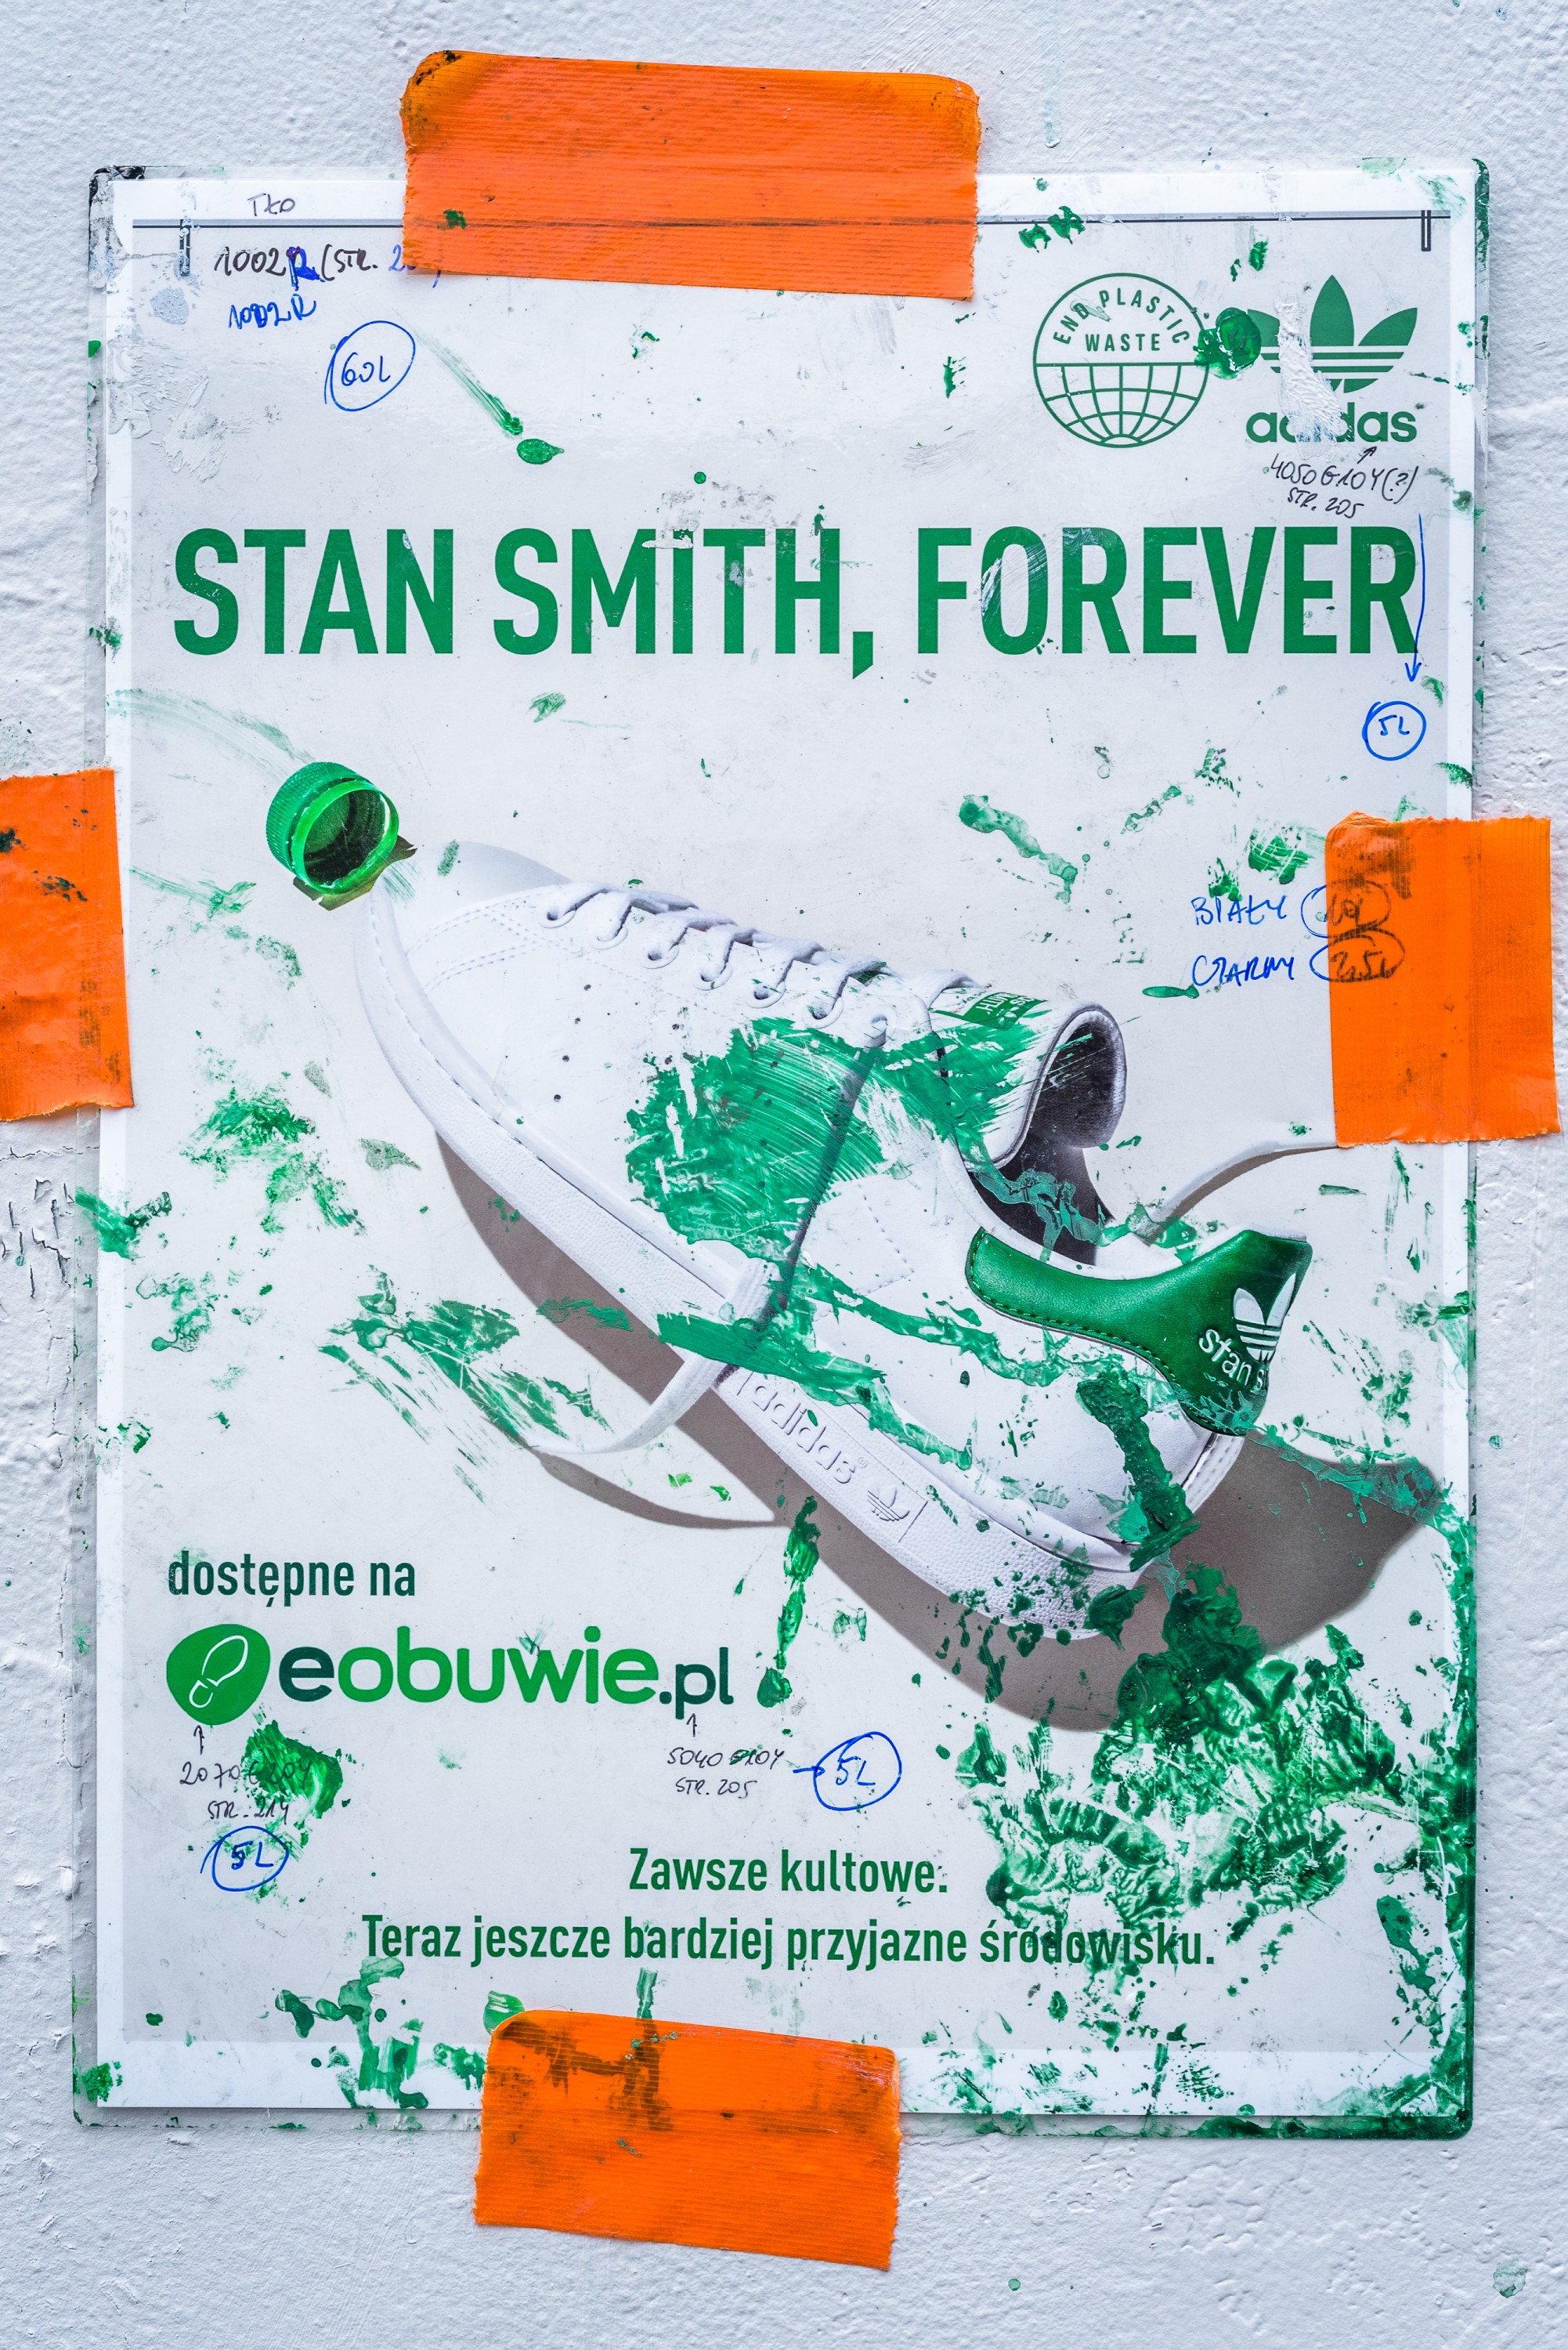 Handpainted large format Adidas advertisment in Warsaw | STAN SMITH, FOREVER | Portfolio